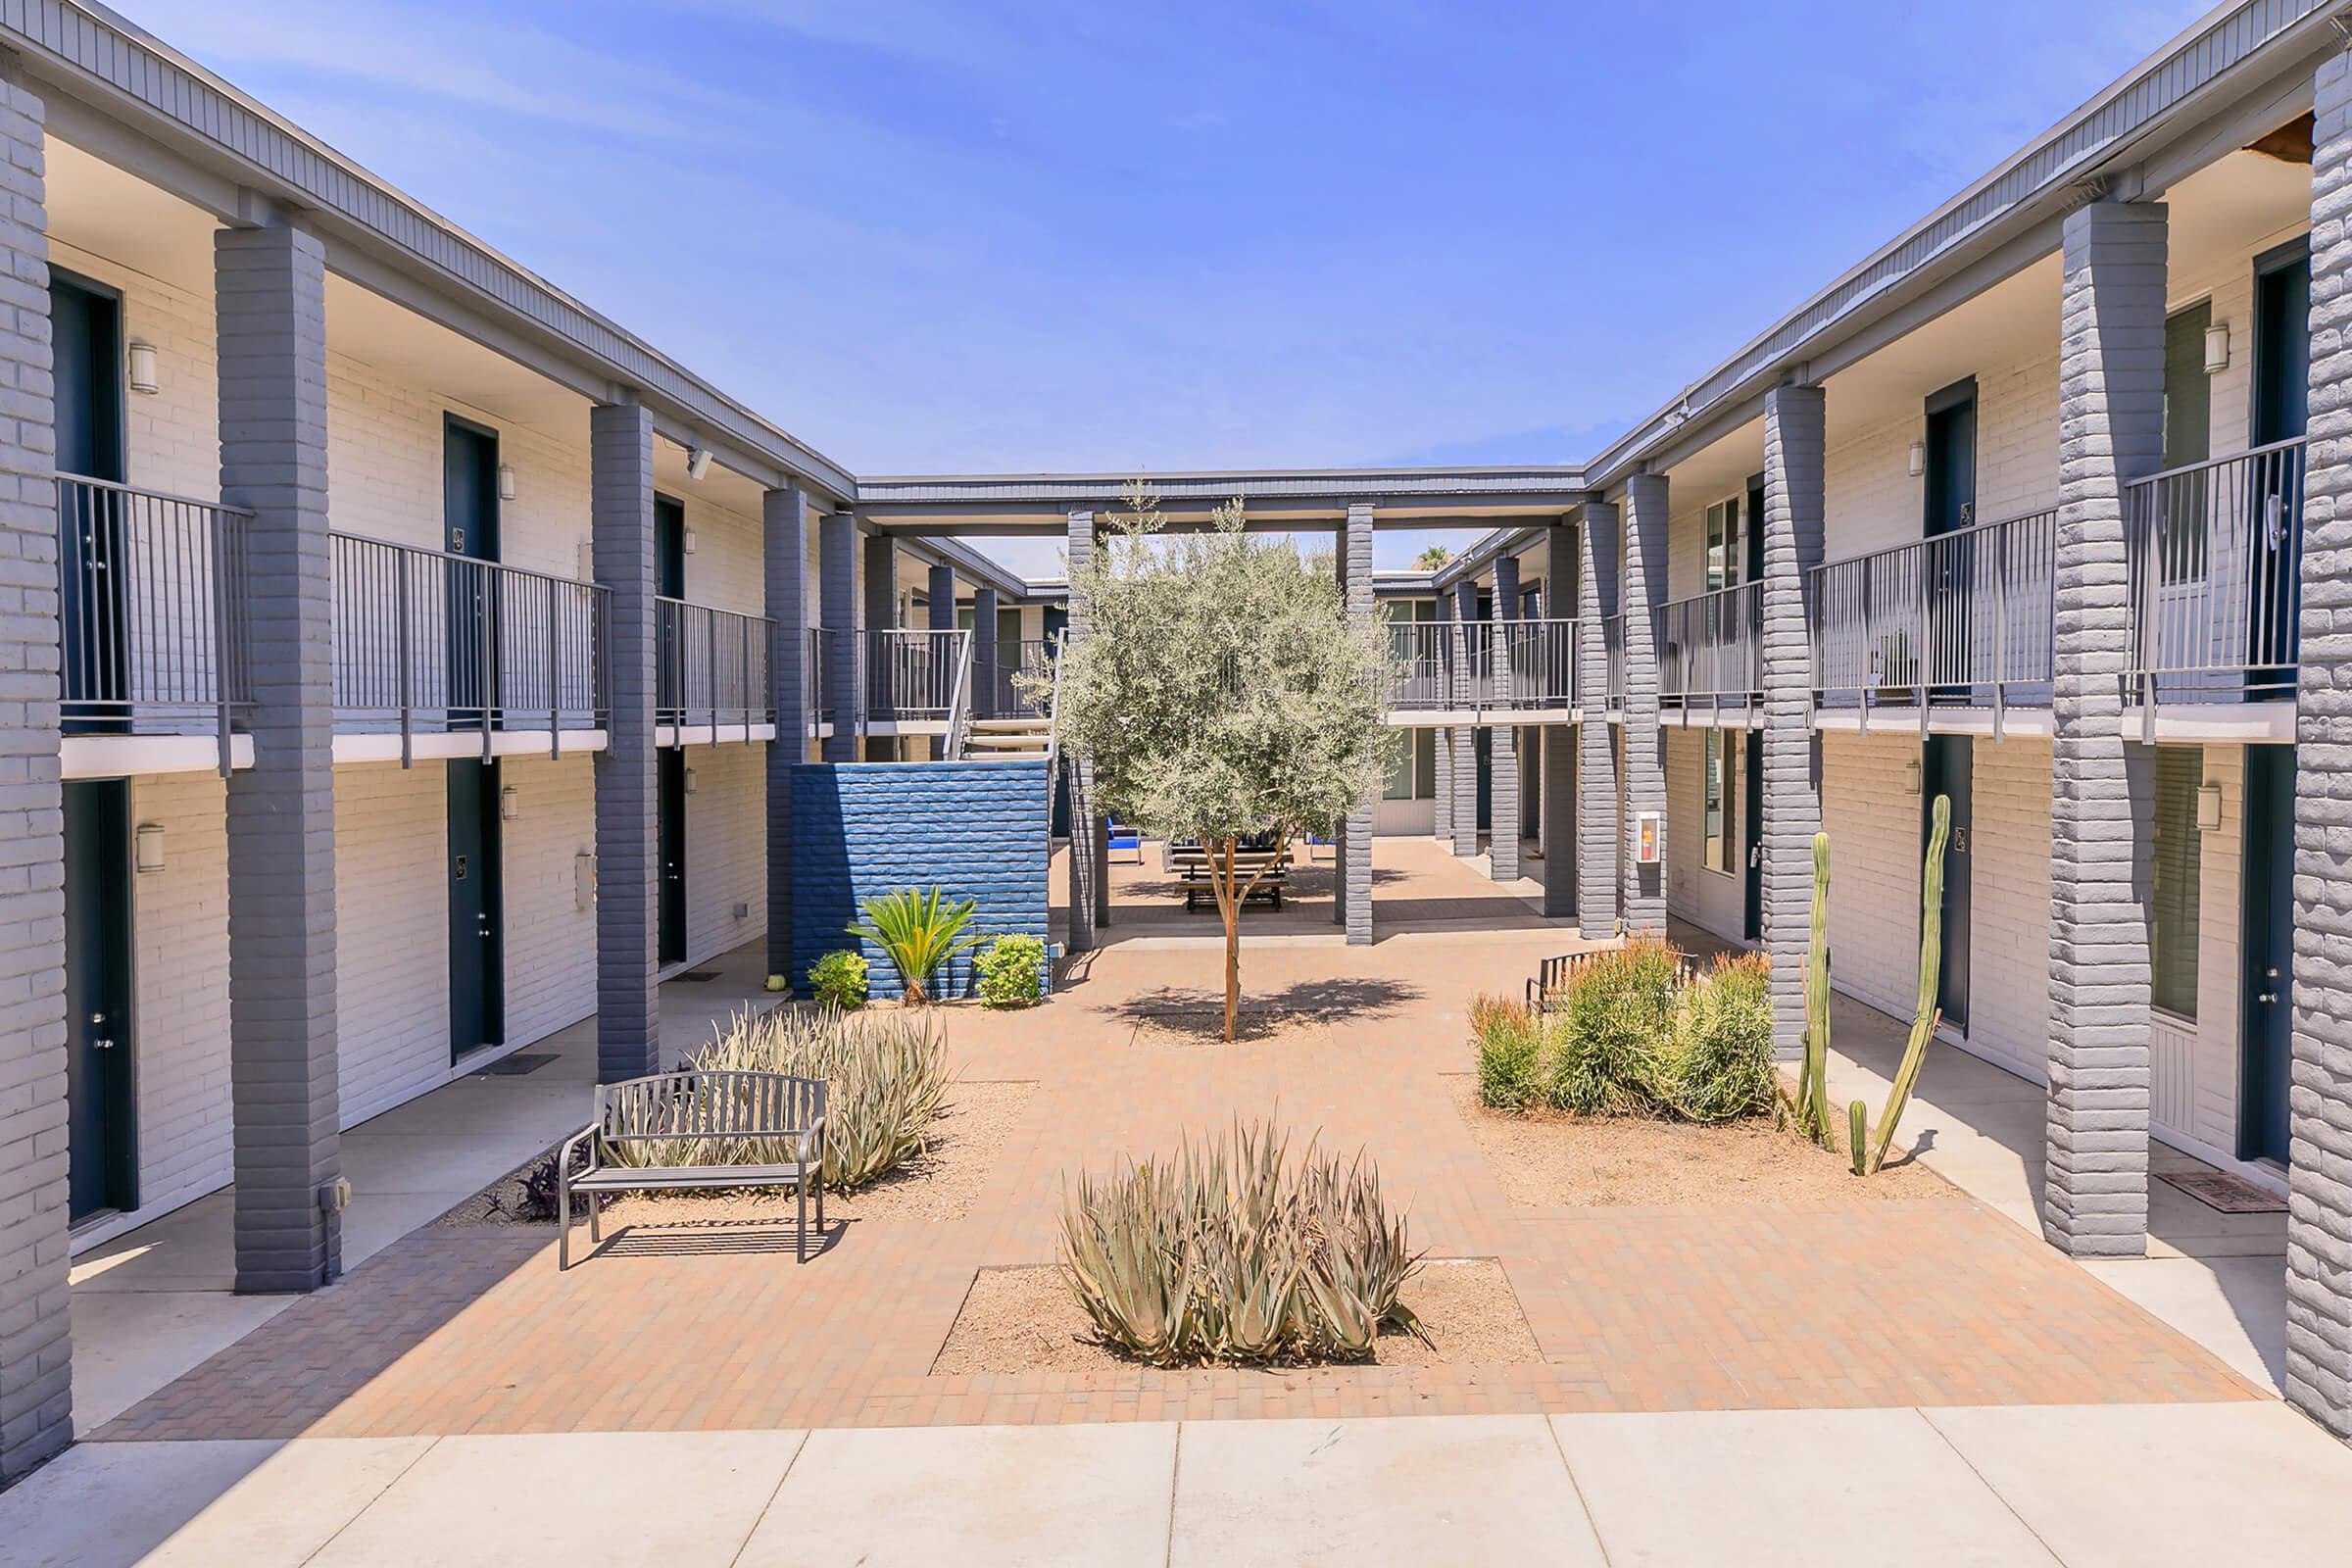 Landscaped courtyard nestled between two large Phoenix apartment buildings connected by an overpass archway